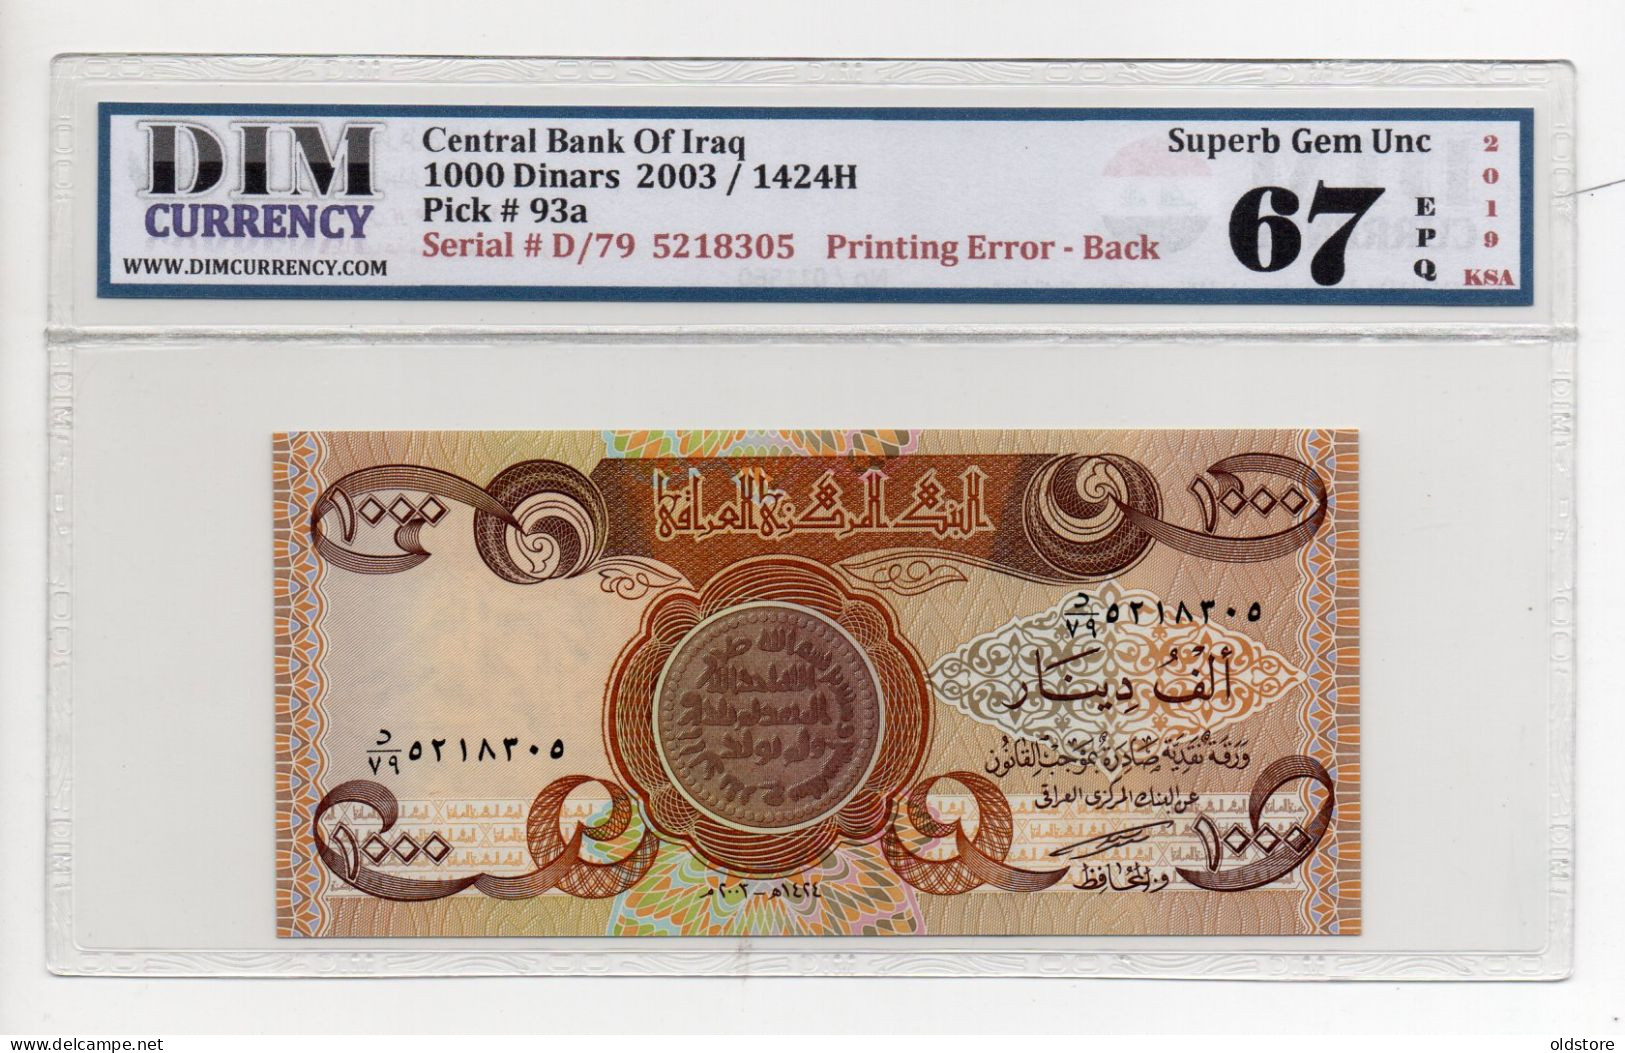 Iraq Banknotes 1000 Dinars - Very Rare ERROR Background Is A Different Color - ND 2003 - Grade By DIM Superb UNC 67 EPQ - Irak